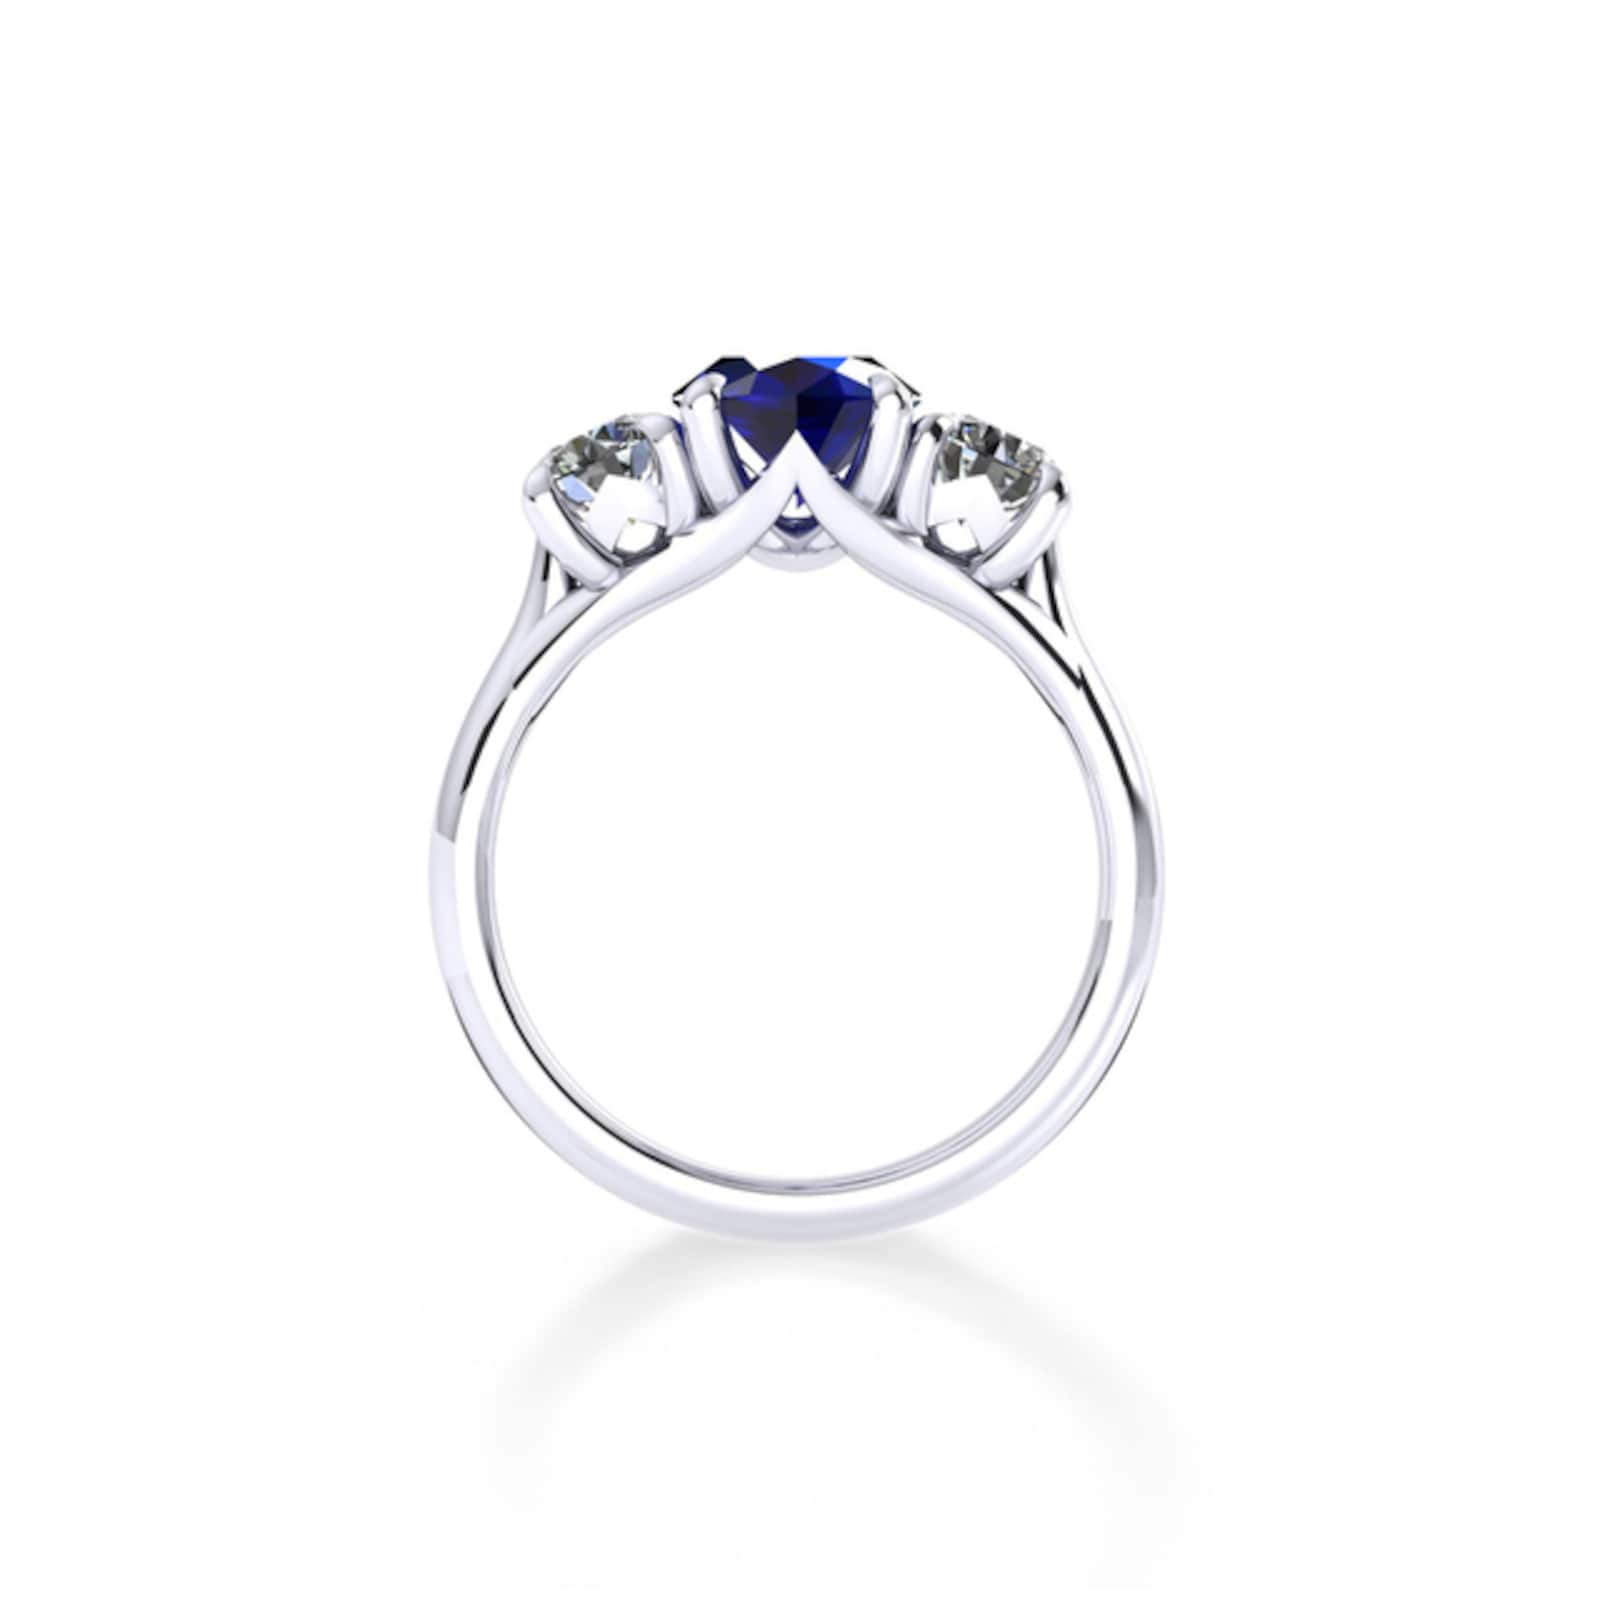 Mappin & Webb Ena Harkness Platinum And Three Stone 7x5mm Sapphire Ring ...